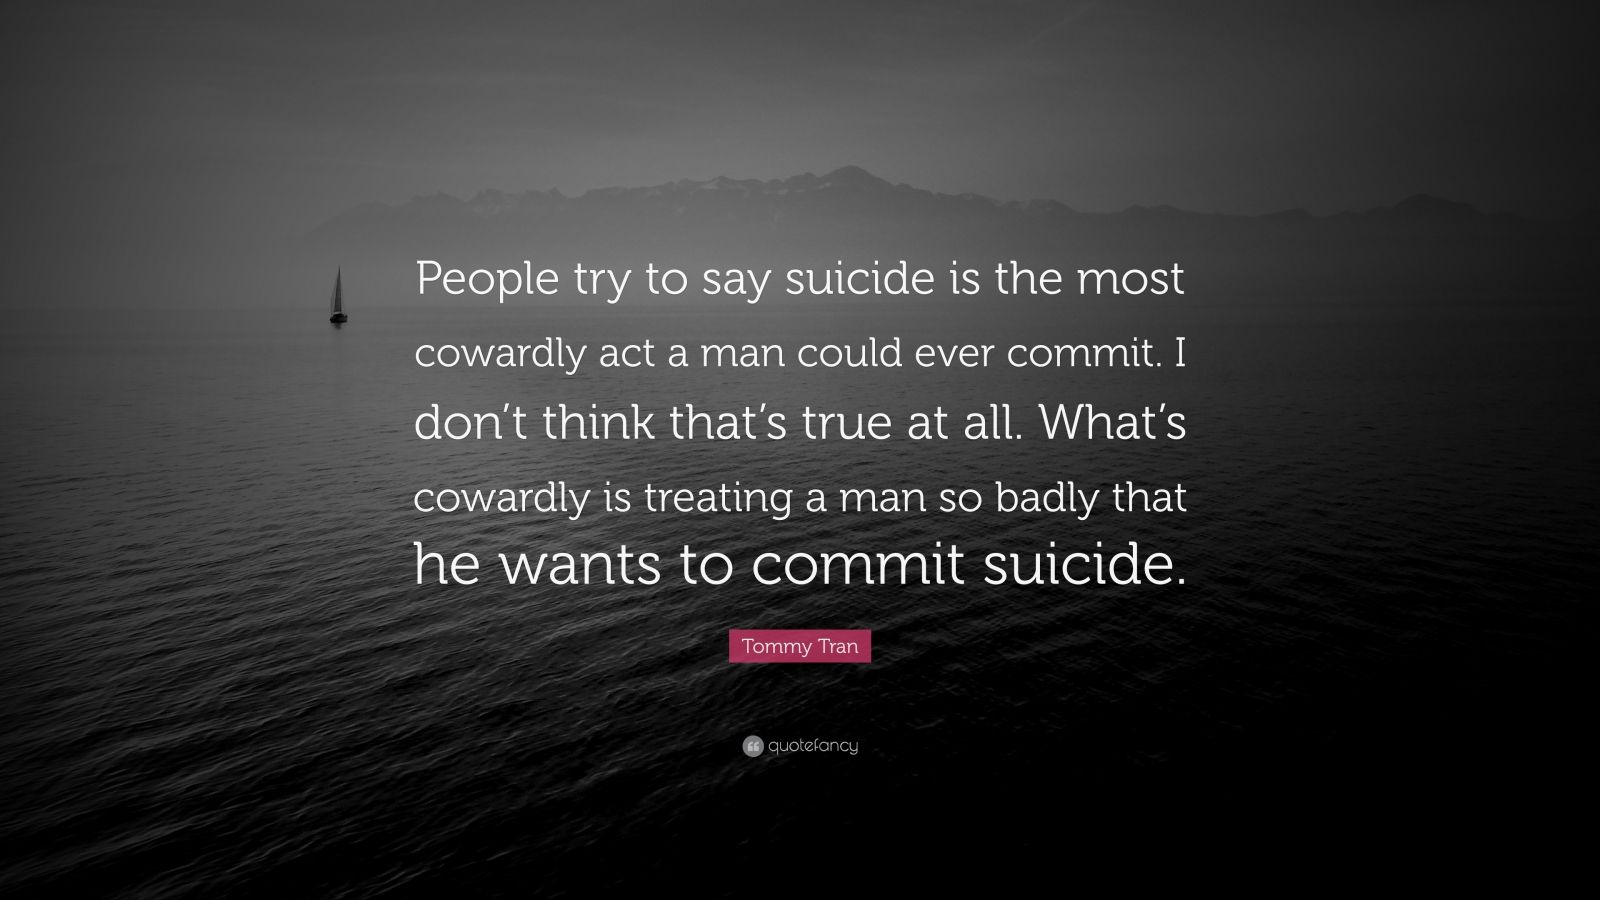 Tommy Tran Quote: “People try to say suicide is the most cowardly act a